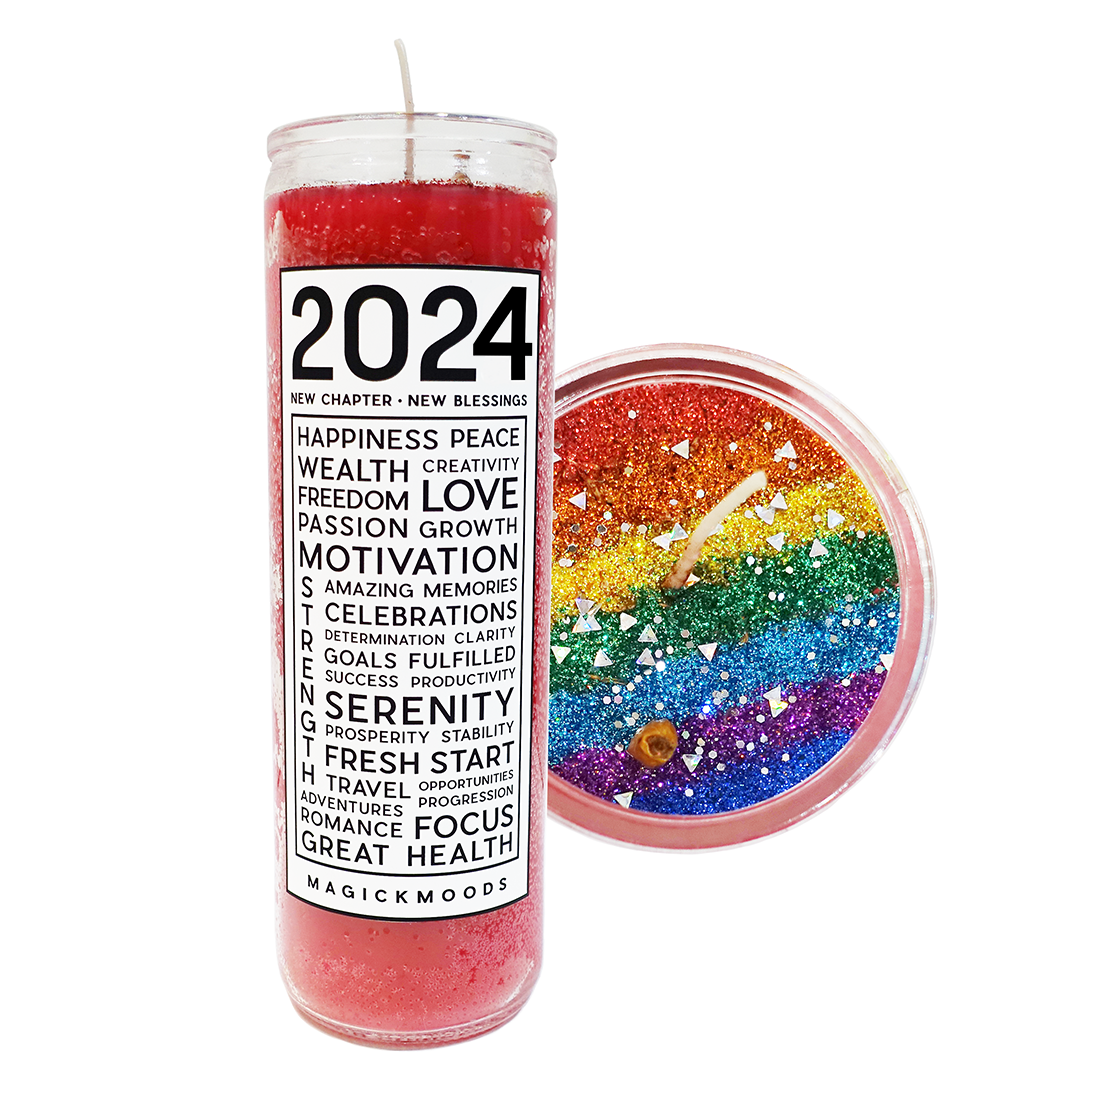 2024 Blessings 7-Day Meditation Candle - PREORDER - Ships by Feb 26th, 2024